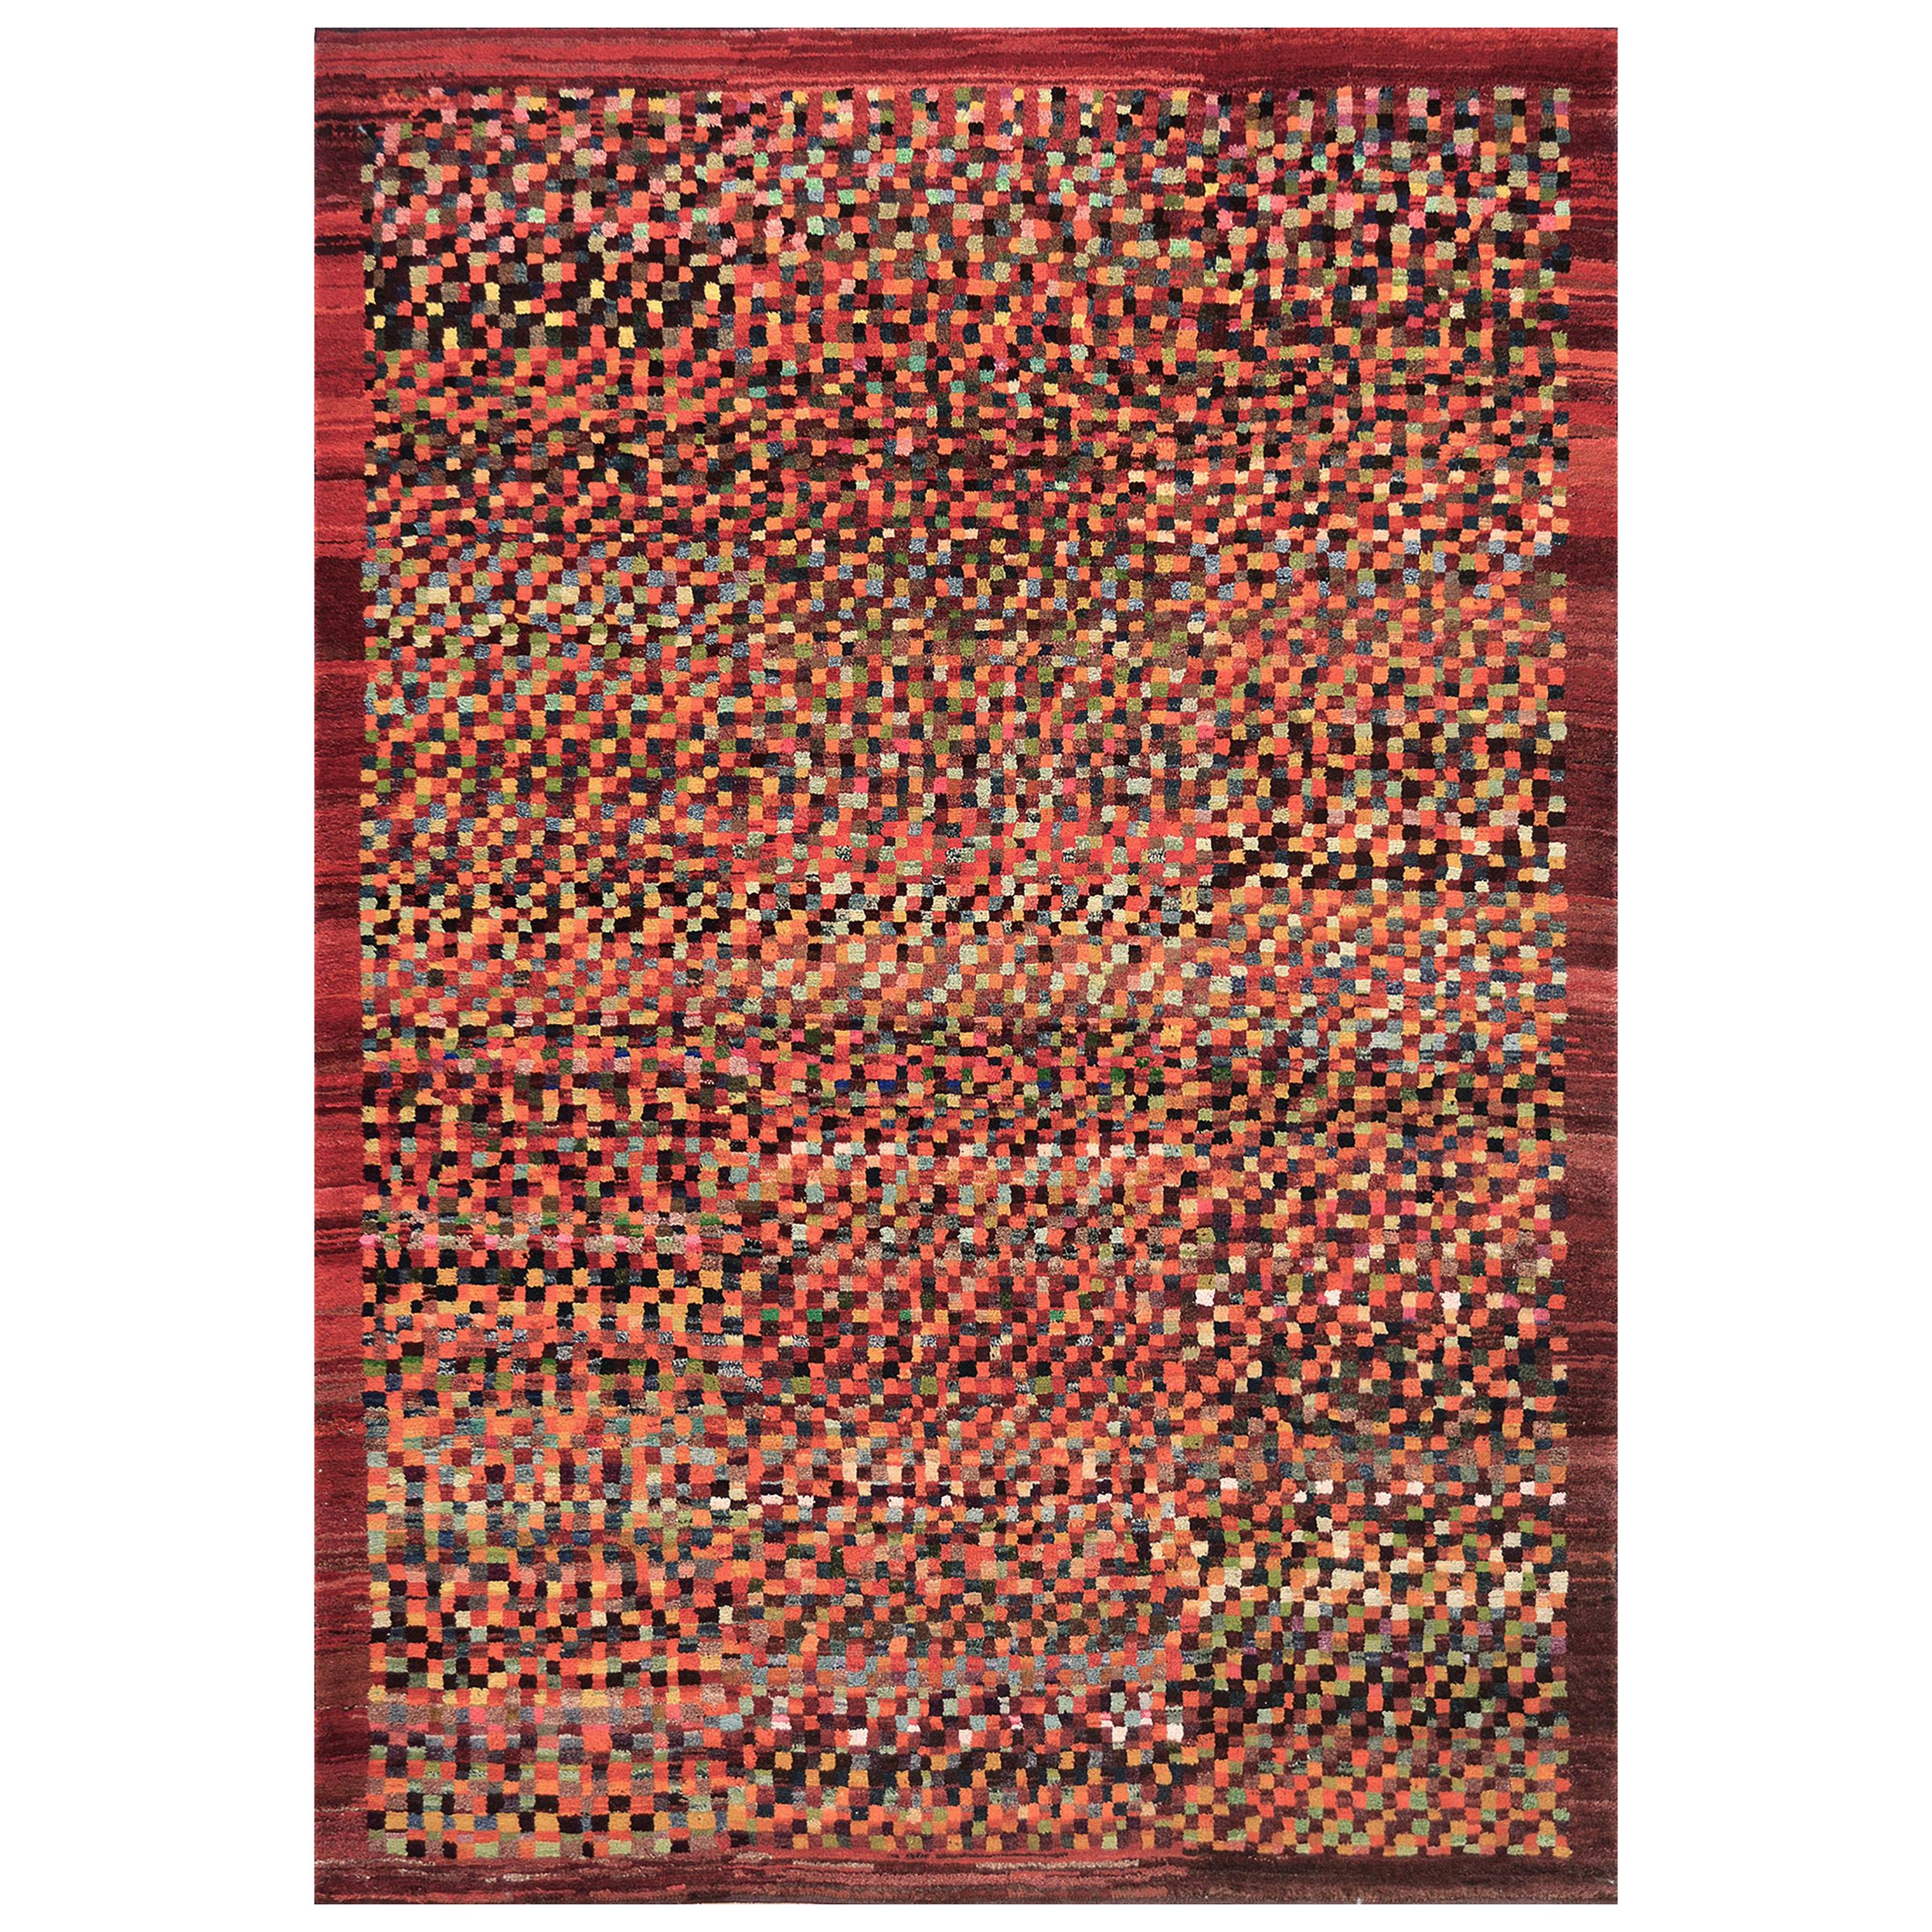 Handwoven Deep-Pile Colorful Contemporary Deco Rug